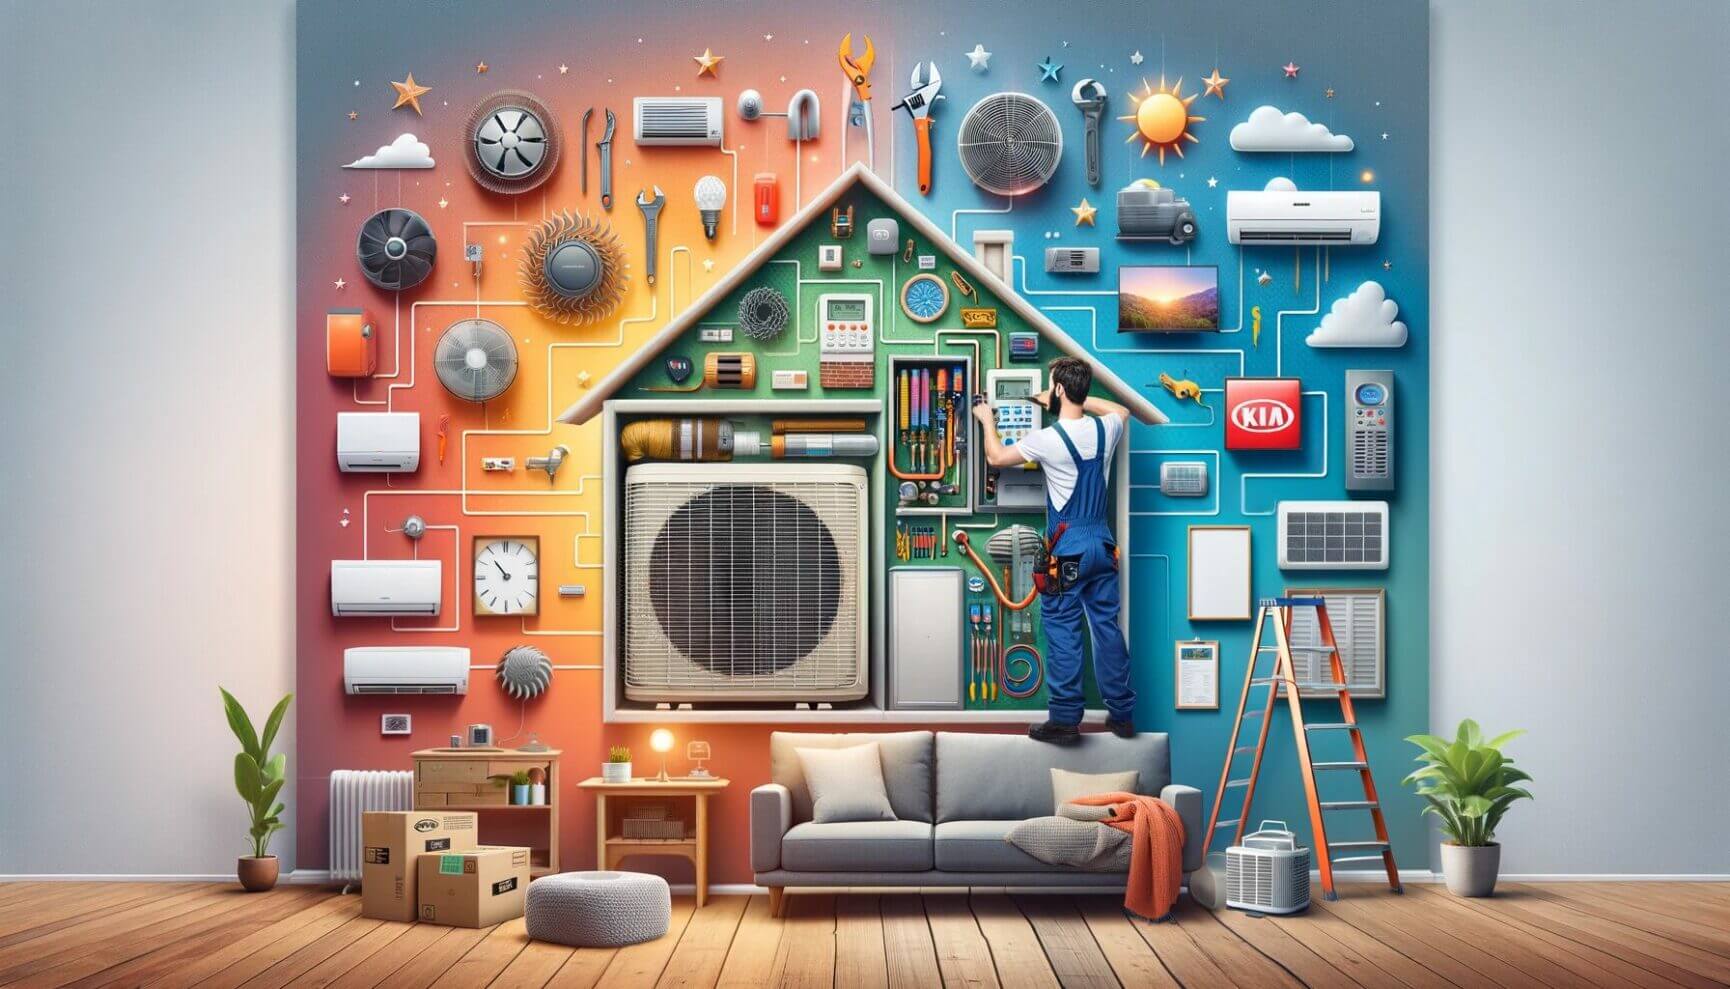 An image of a house with many different appliances on it.